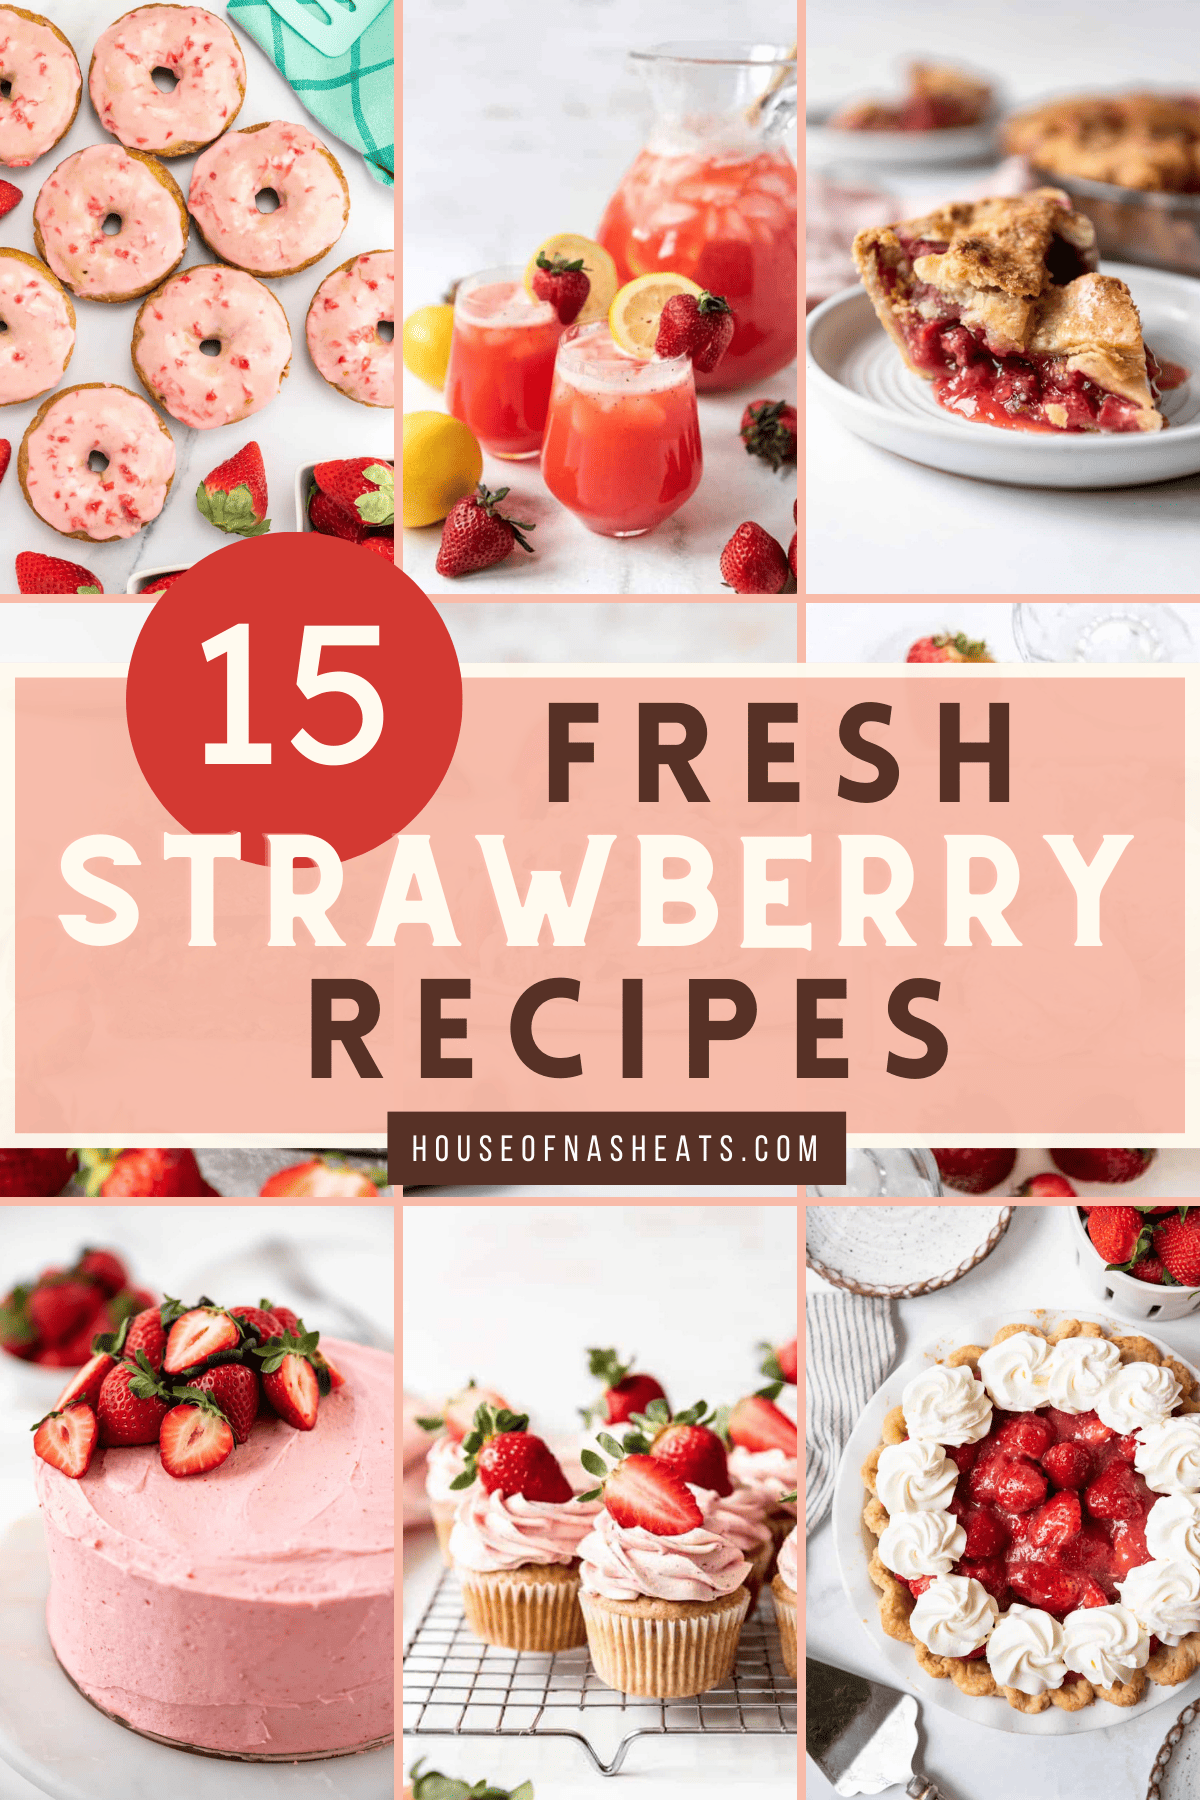 An image with several different strawberry recipes like strawberry cake, strawberry cupcakes, strawberry rhubarb pie. 